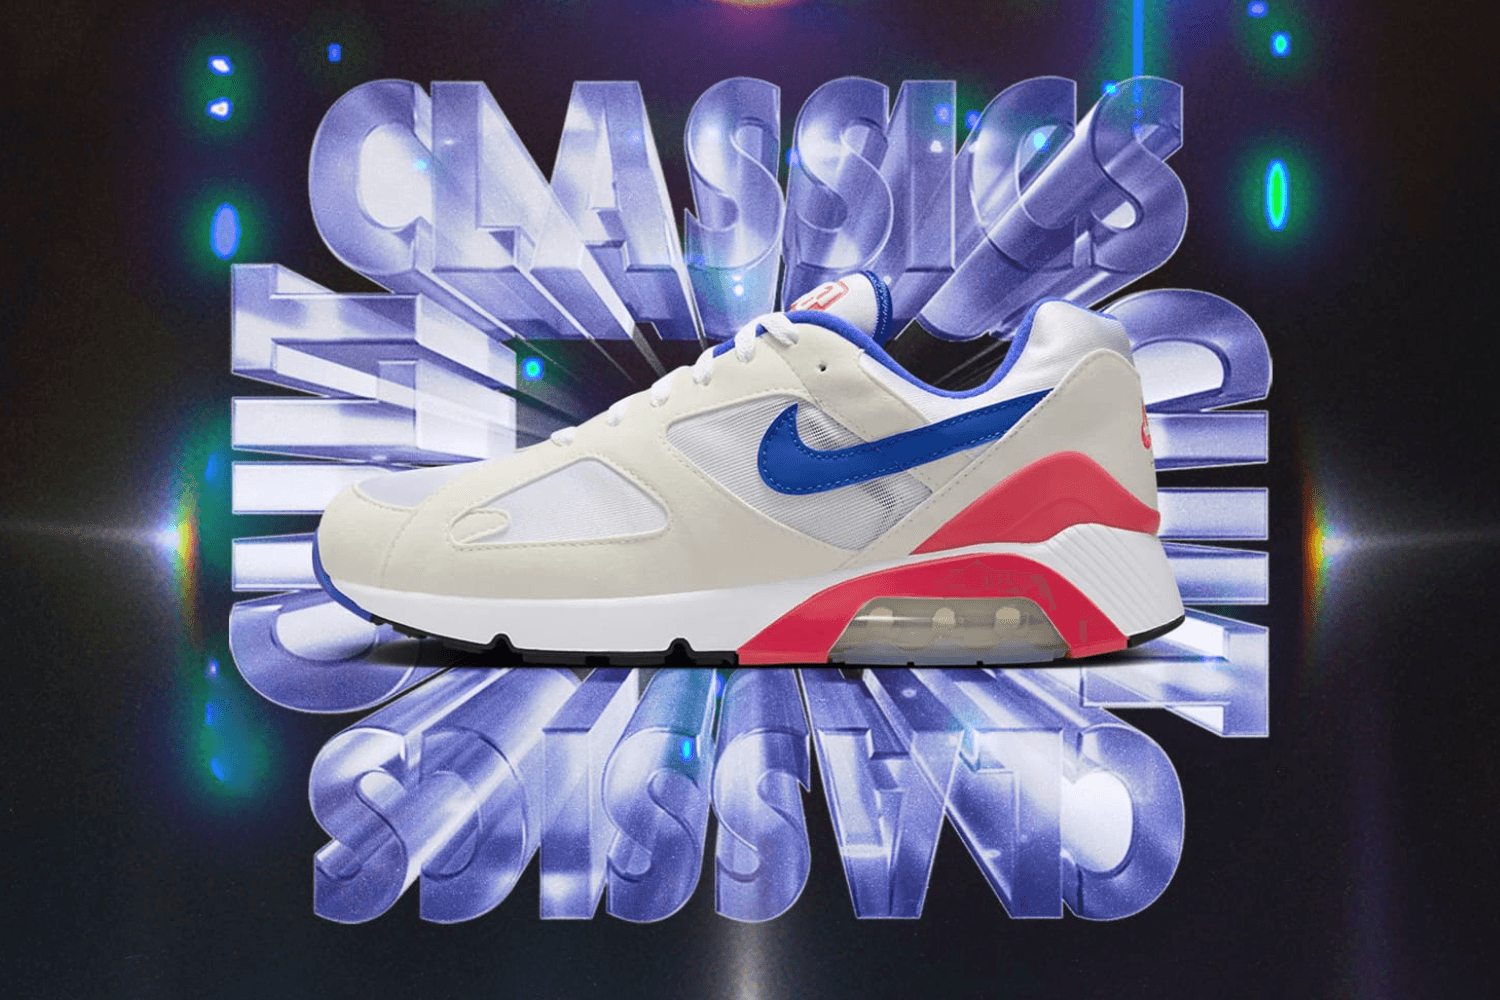 The Nike Air 180 'Ultramarine' is making its comeback - Cult Classics Collection